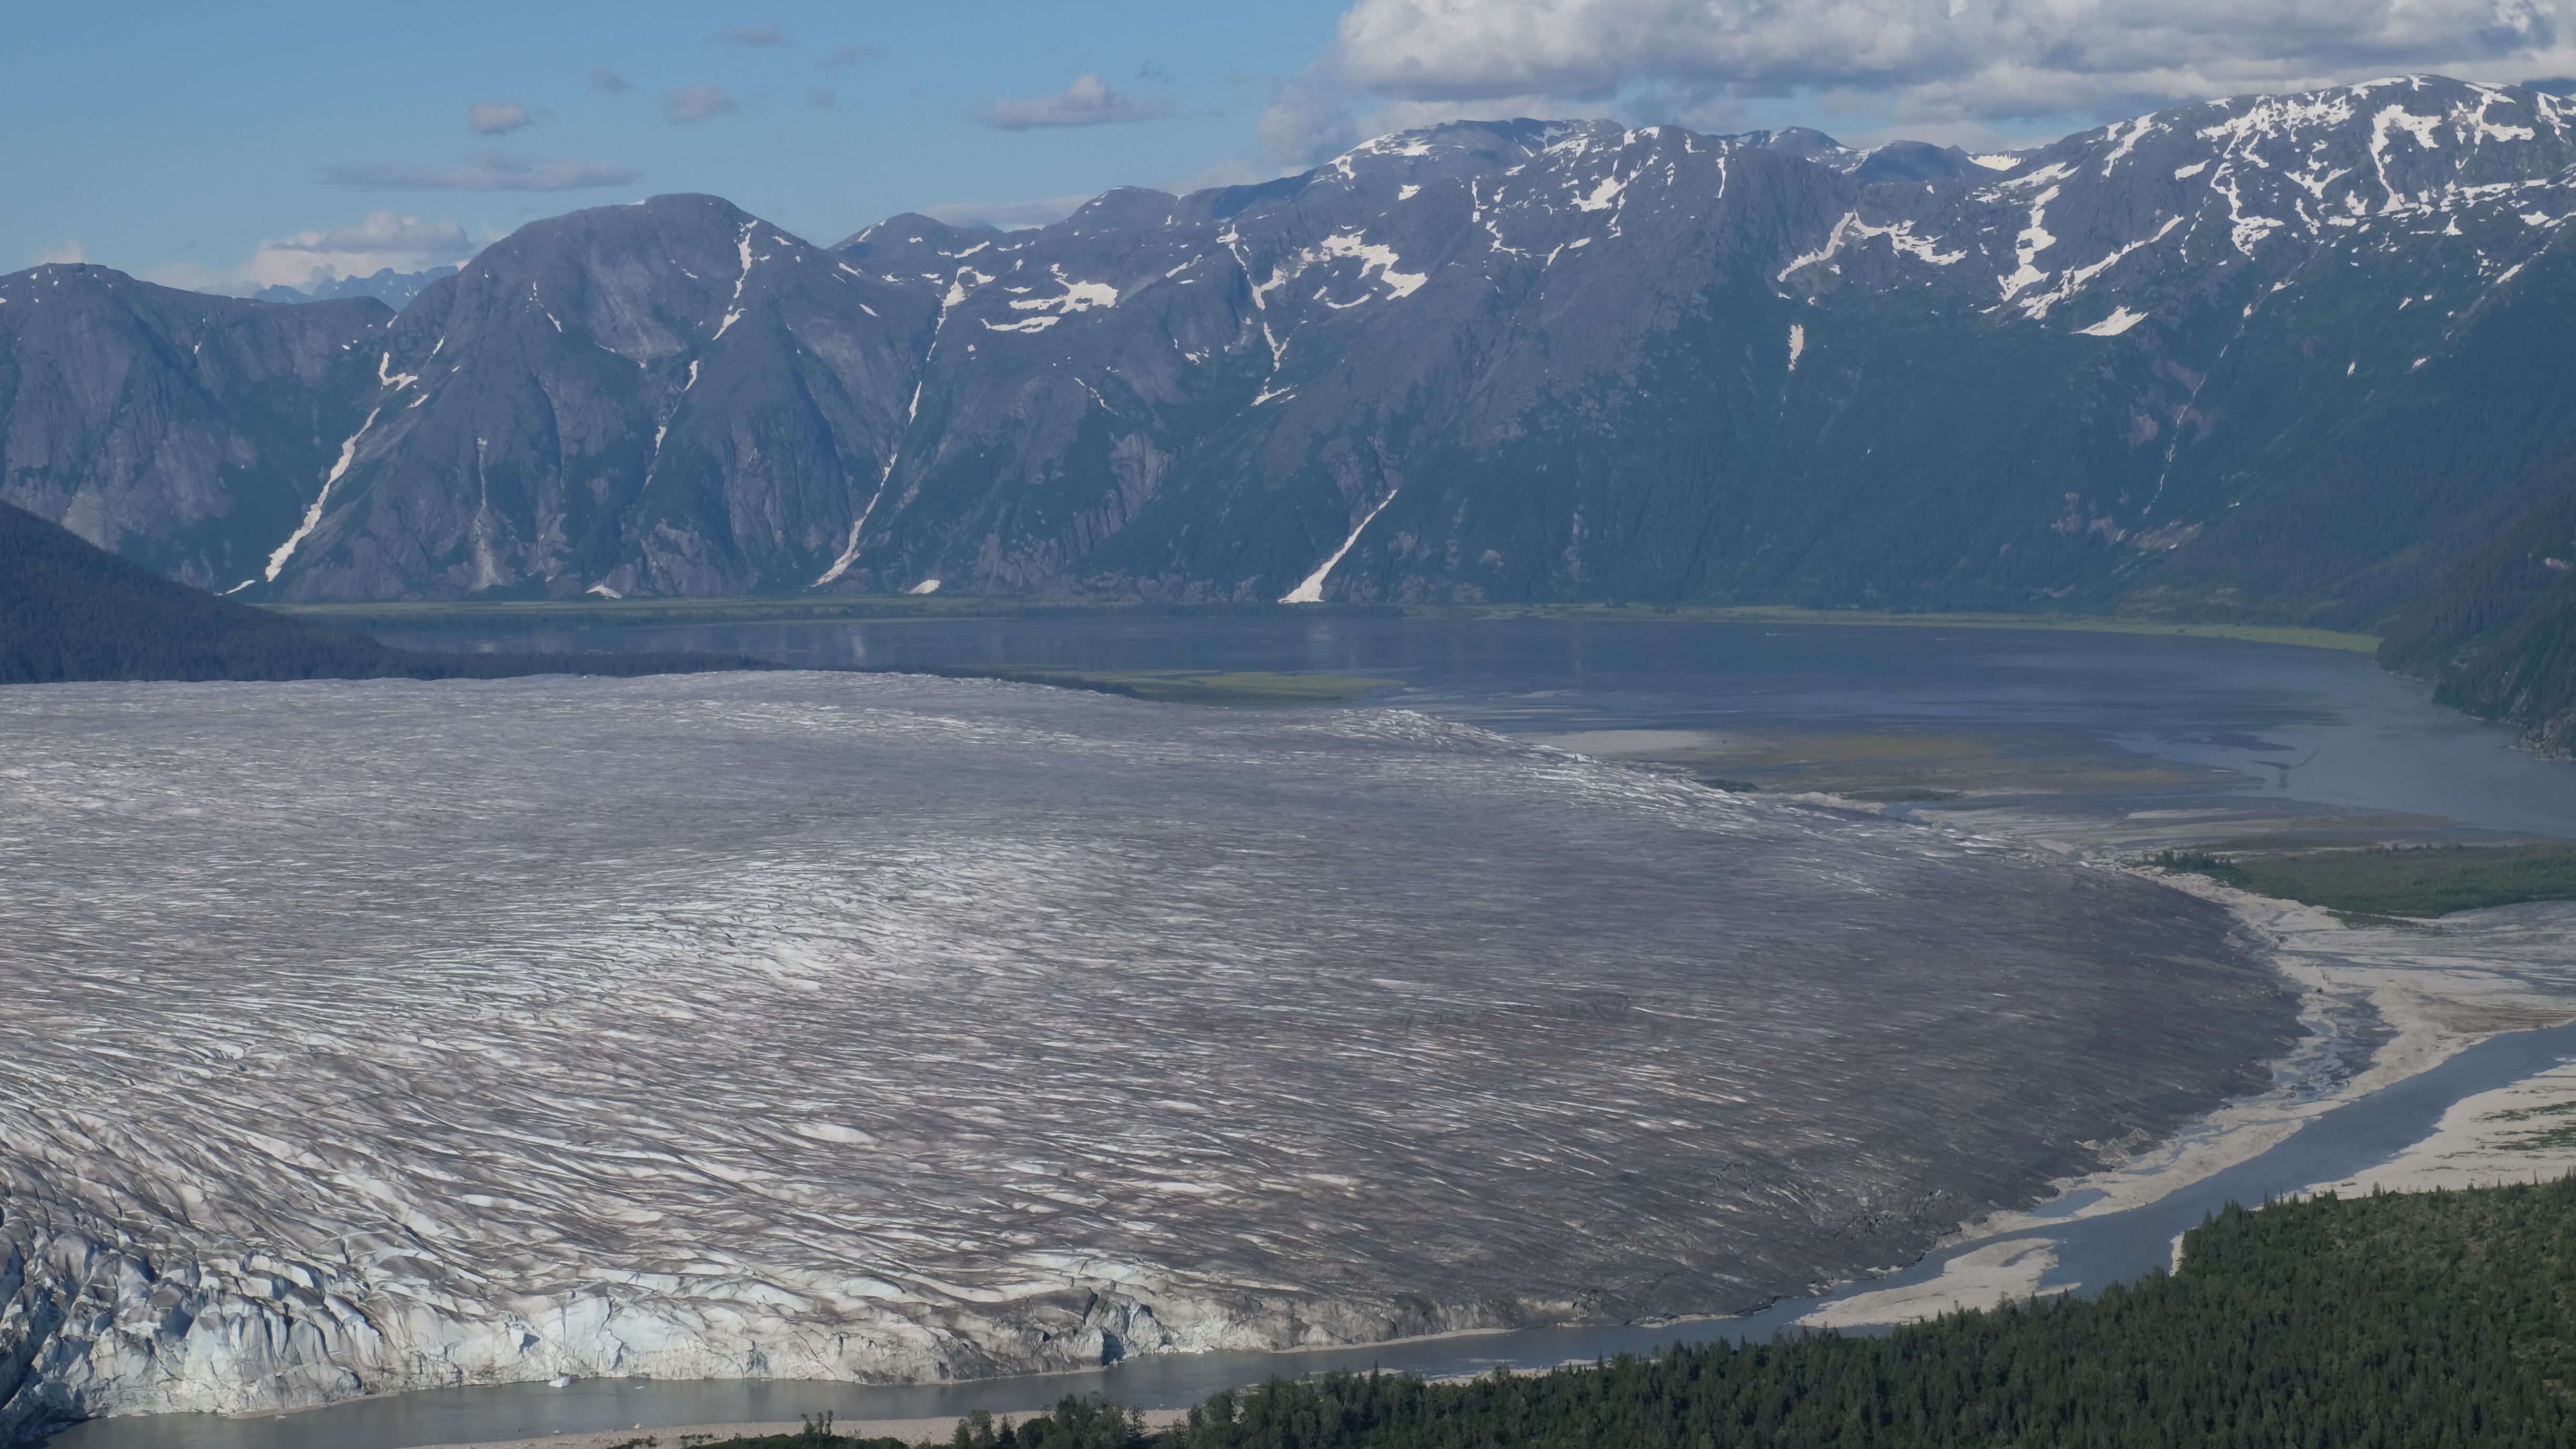 The glaciers on Juneau icefield have seen accelerated melting